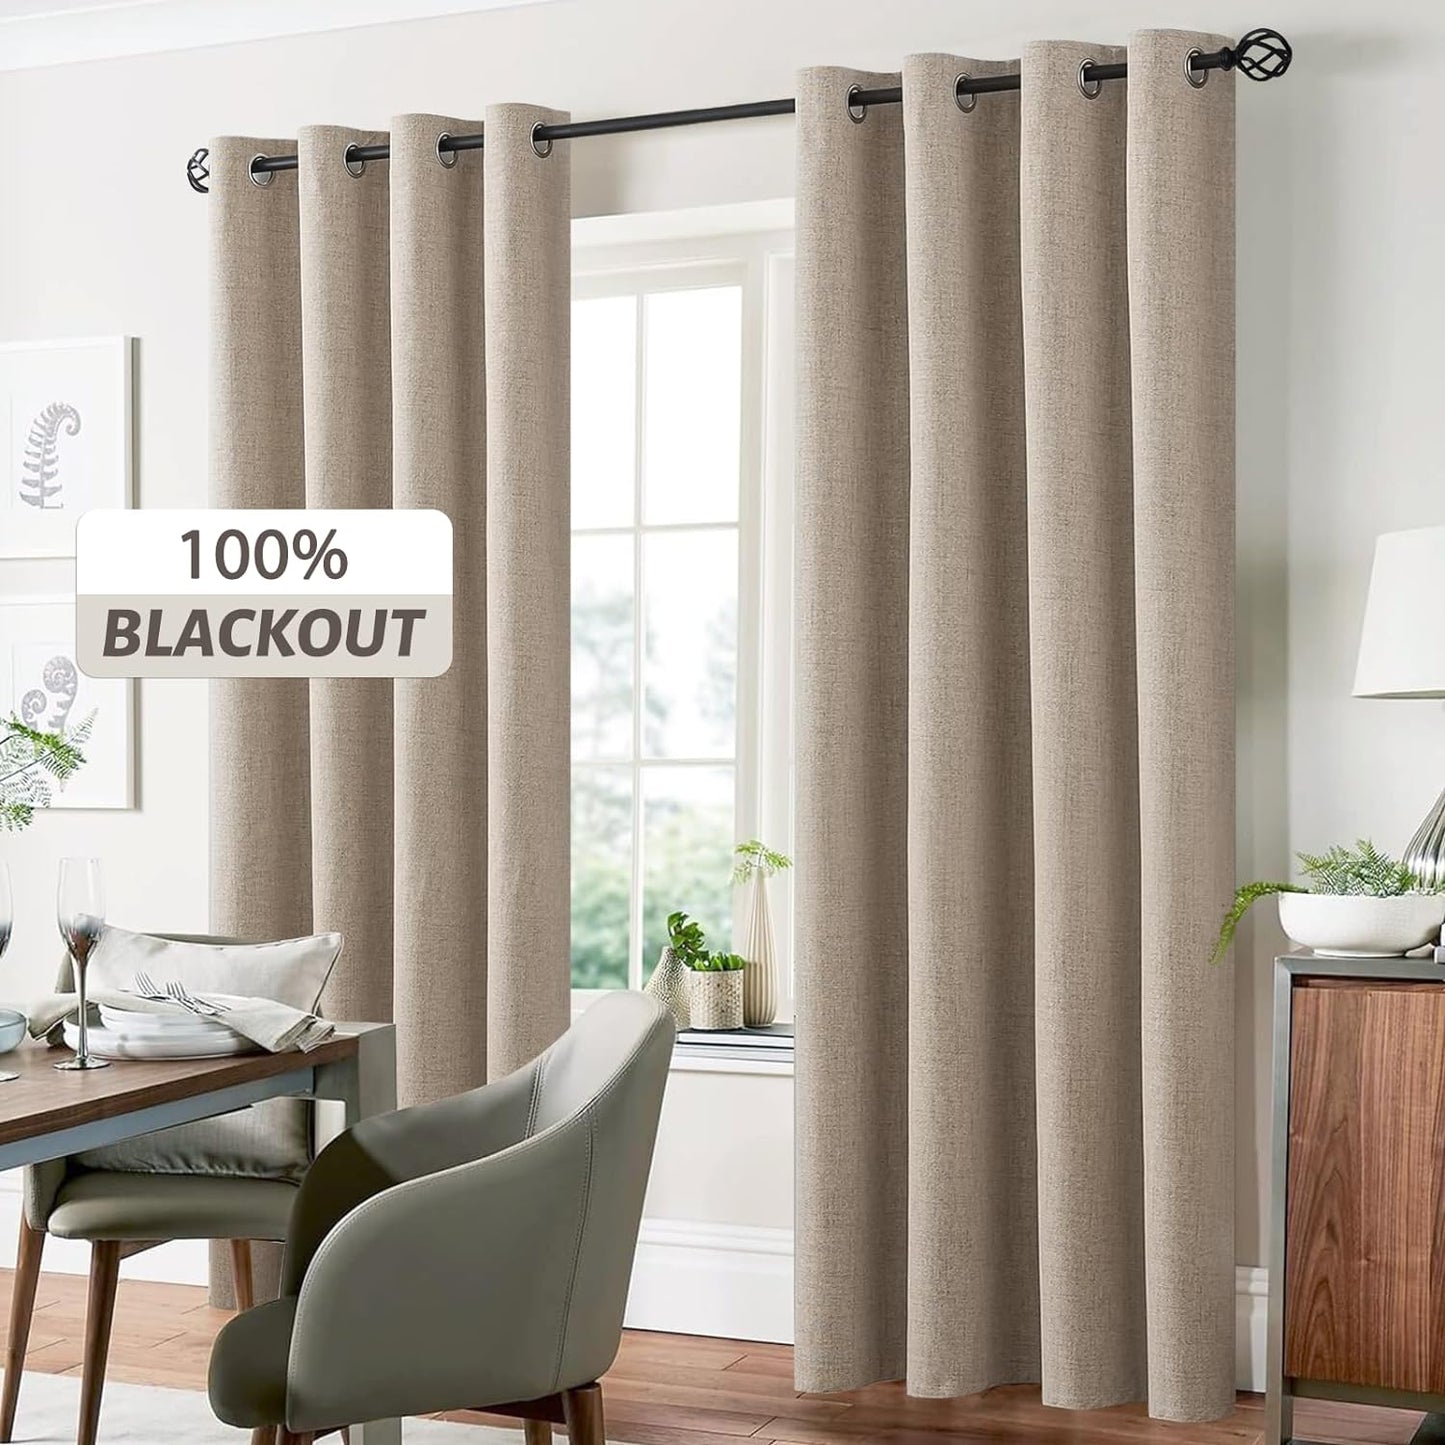 Yakamok Natural Linen Curtains 100% Blackout 84 Inches Long,Room Darkening Textured Curtains for Living Room Thermal Grommet Bedroom Curtains 2 Panels with Greyish White Liner  Yakamok   